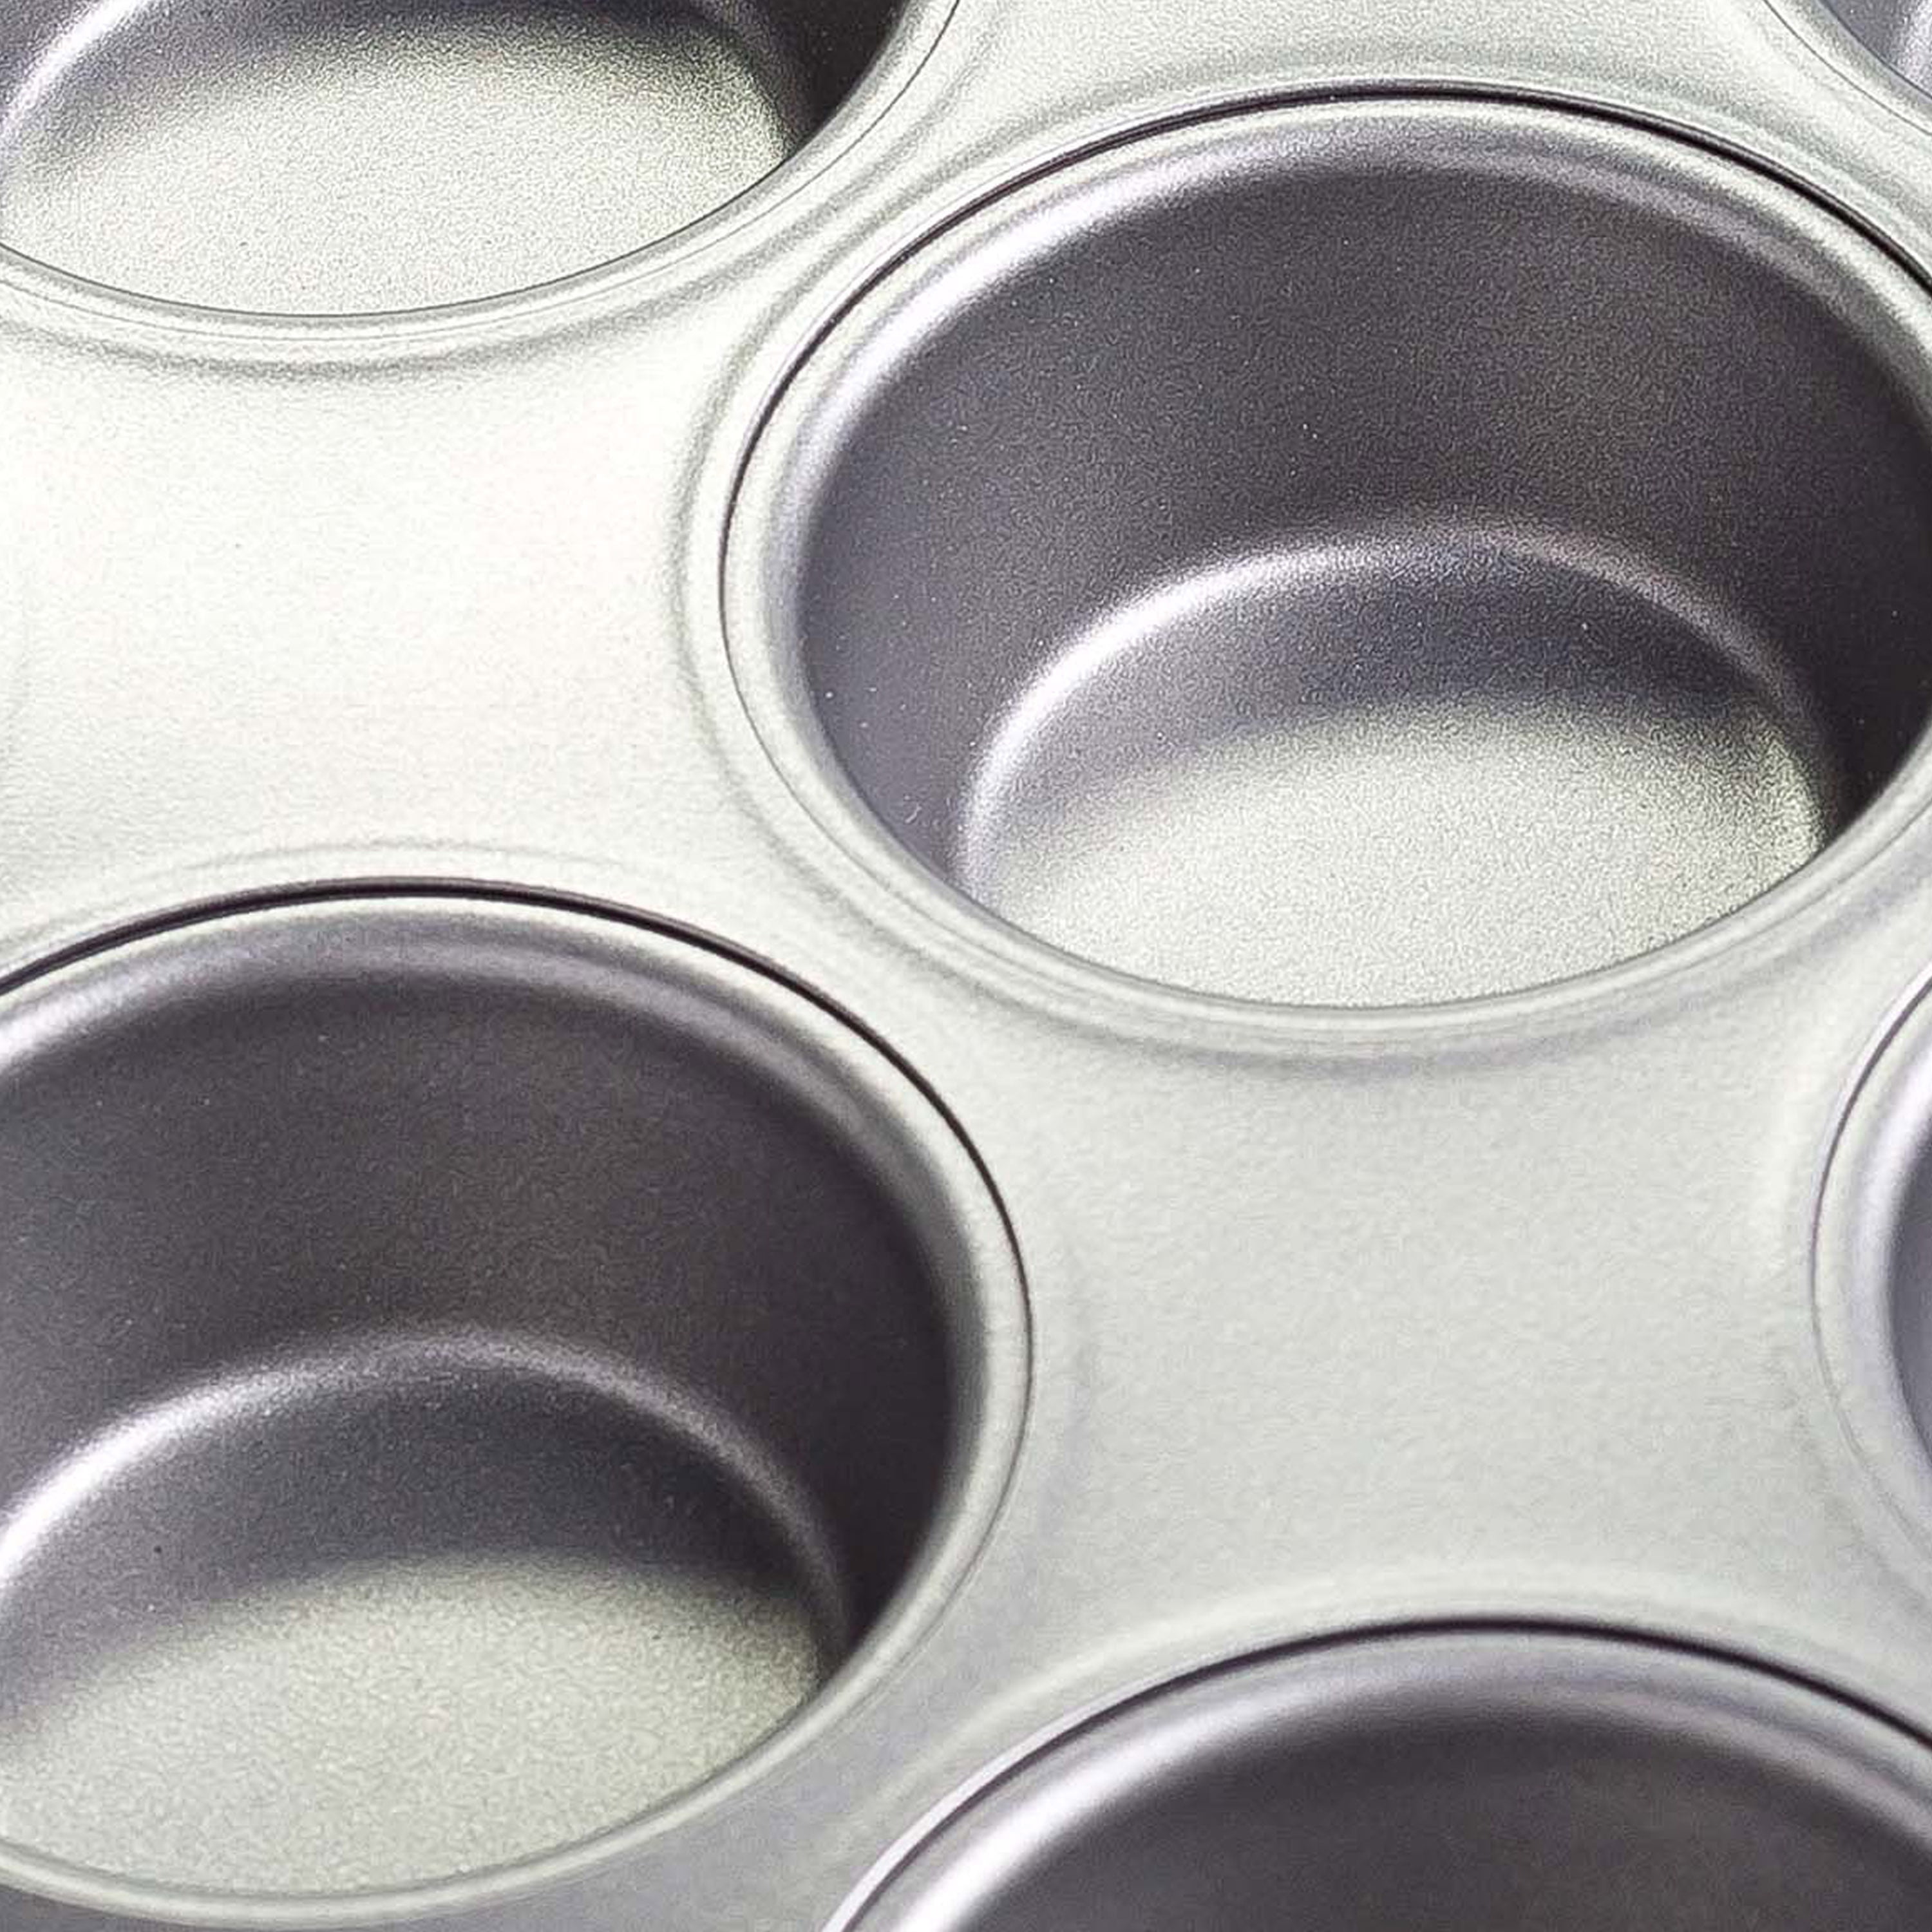 Five Two 12-Cup Muffin Pans, Set of 2